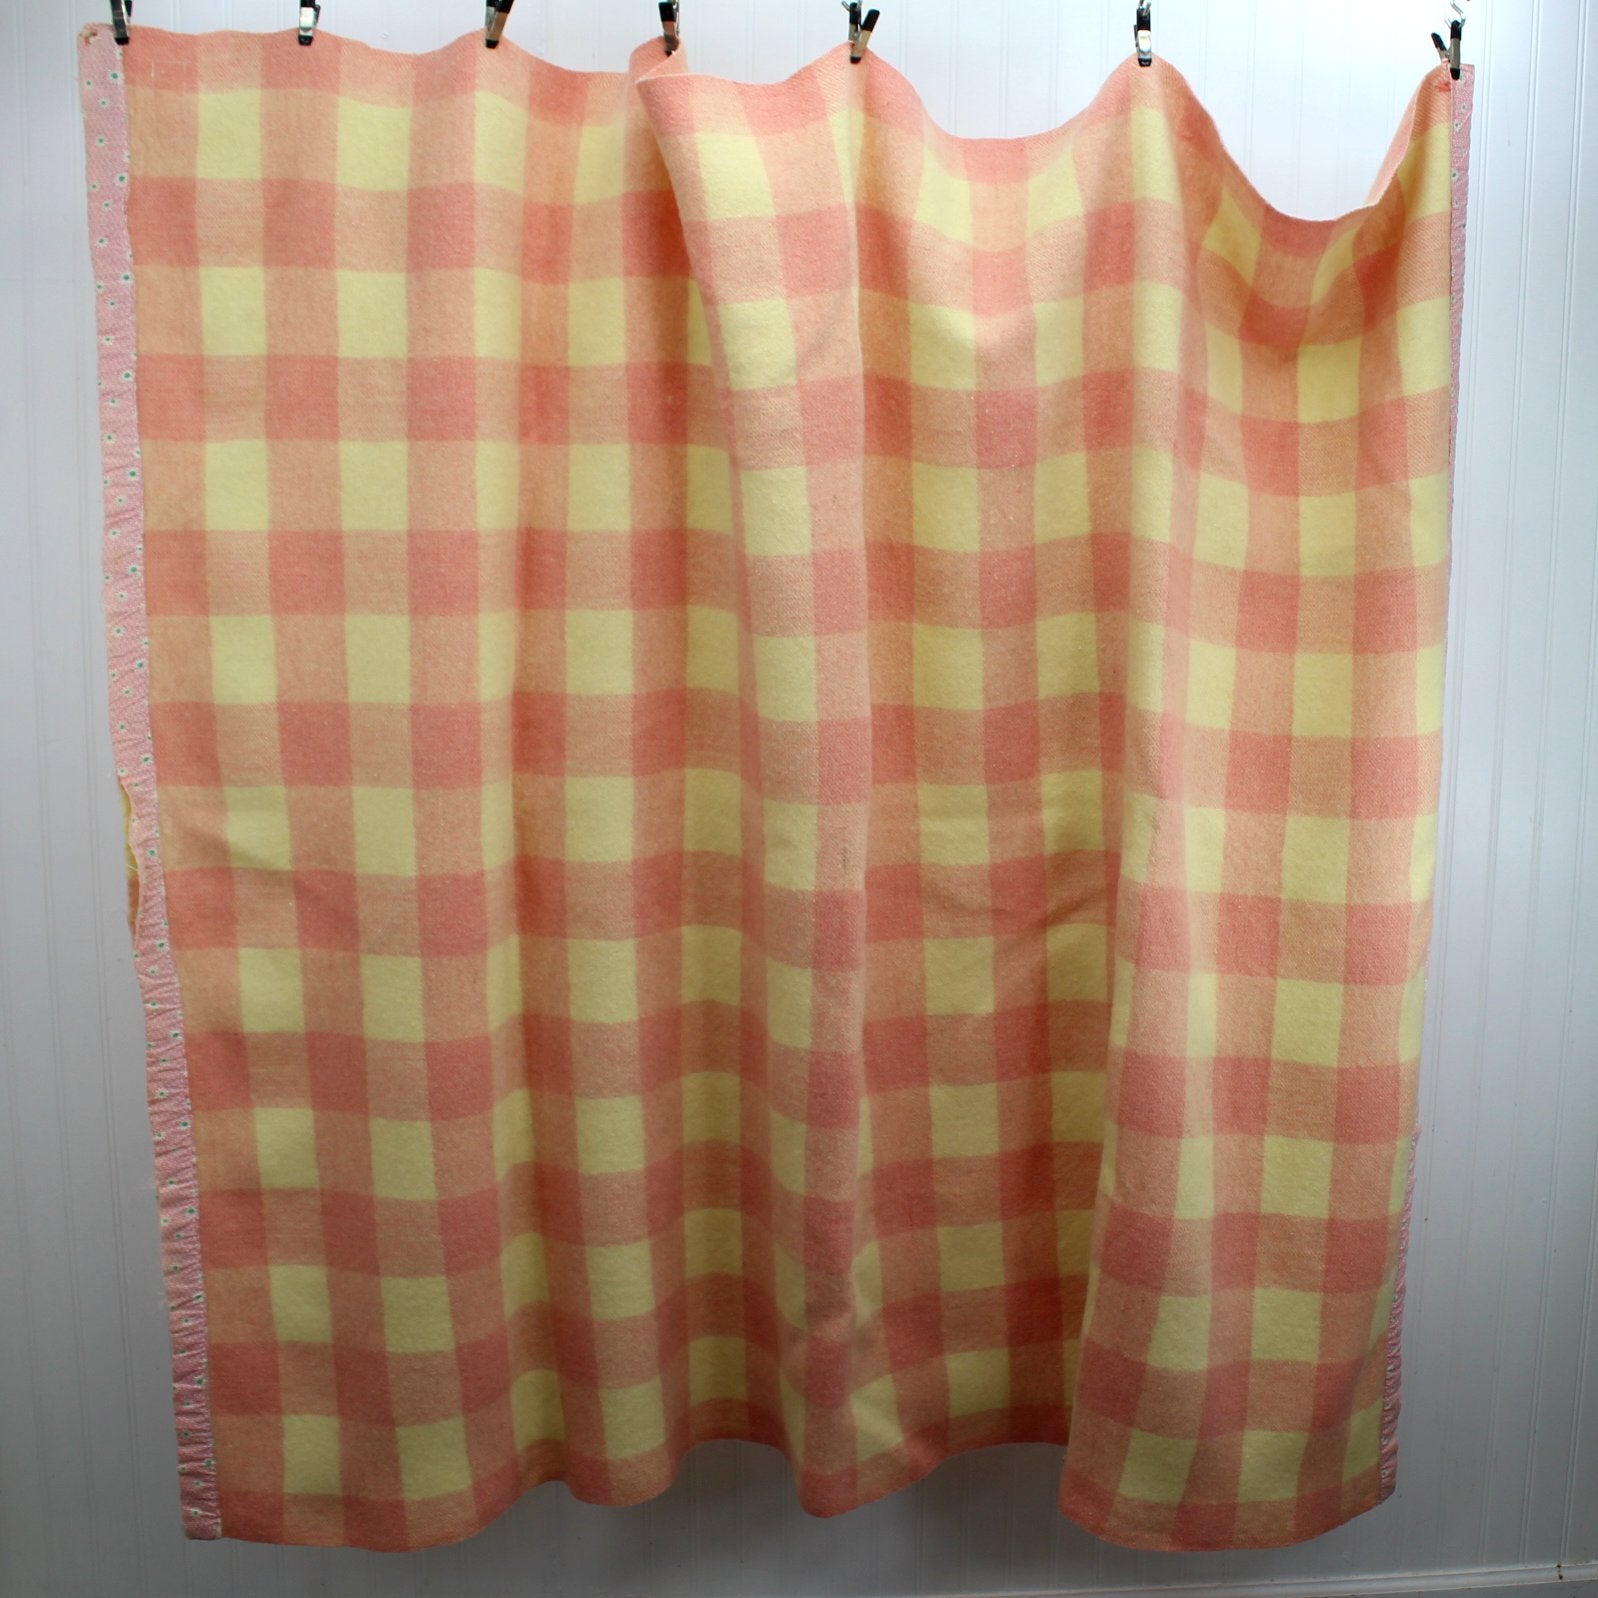 Small Wool Blanket Cream Pink Big Checks Late 1940s Use or Cutter DIY full view showing shape